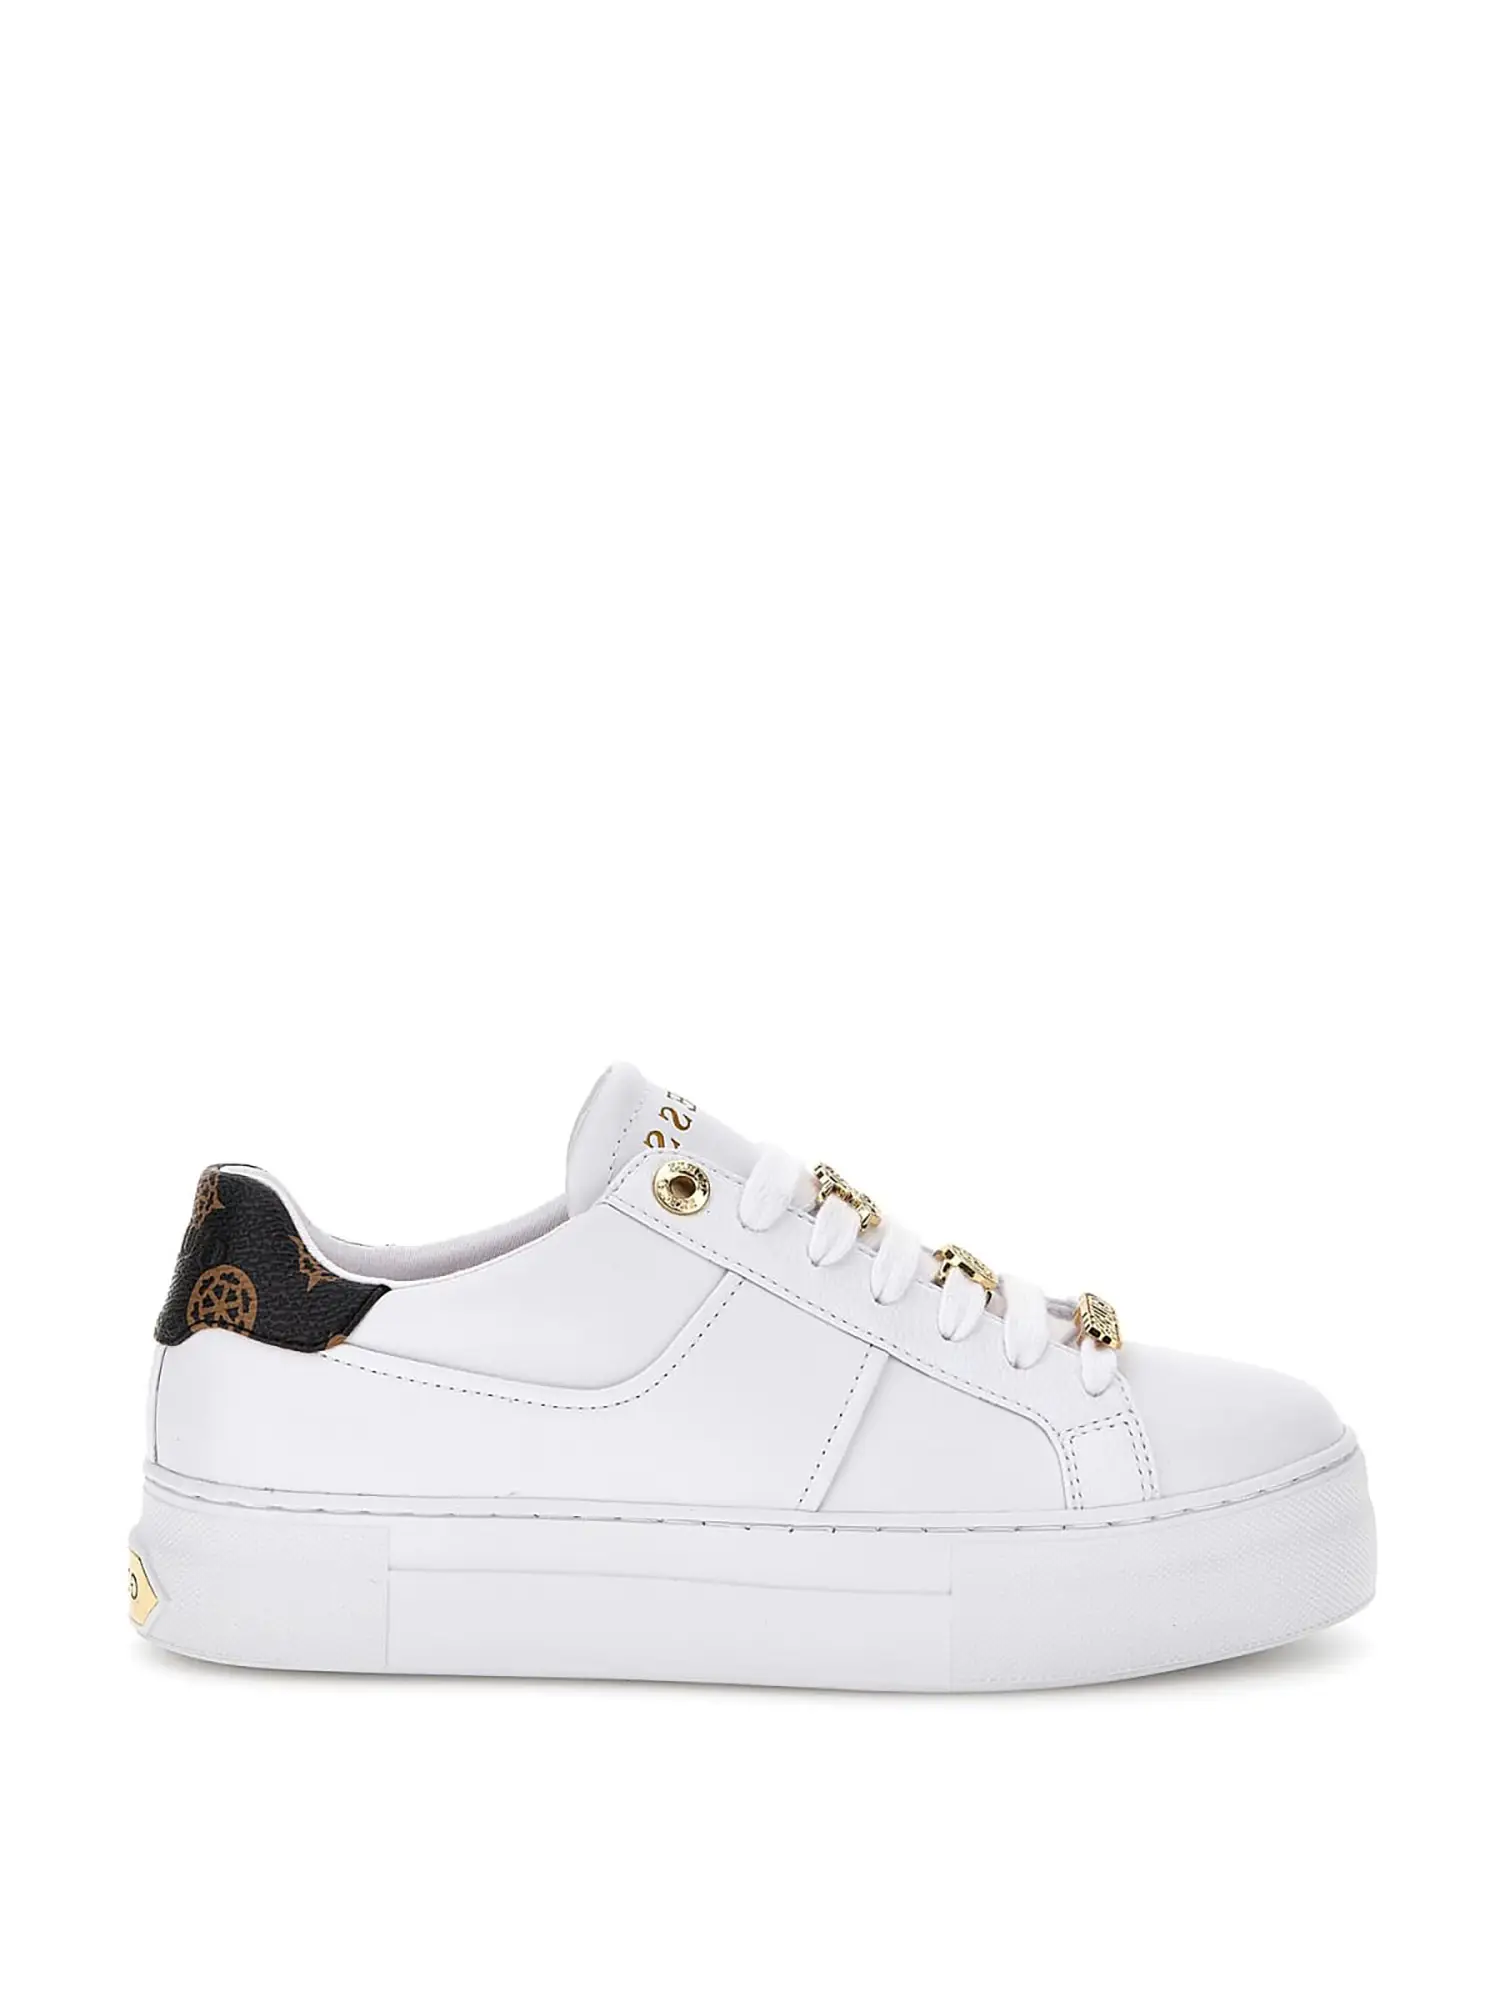 SNEAKERS DONNA - GUESS - FLJGIE ELE12 - BIANCO, 41